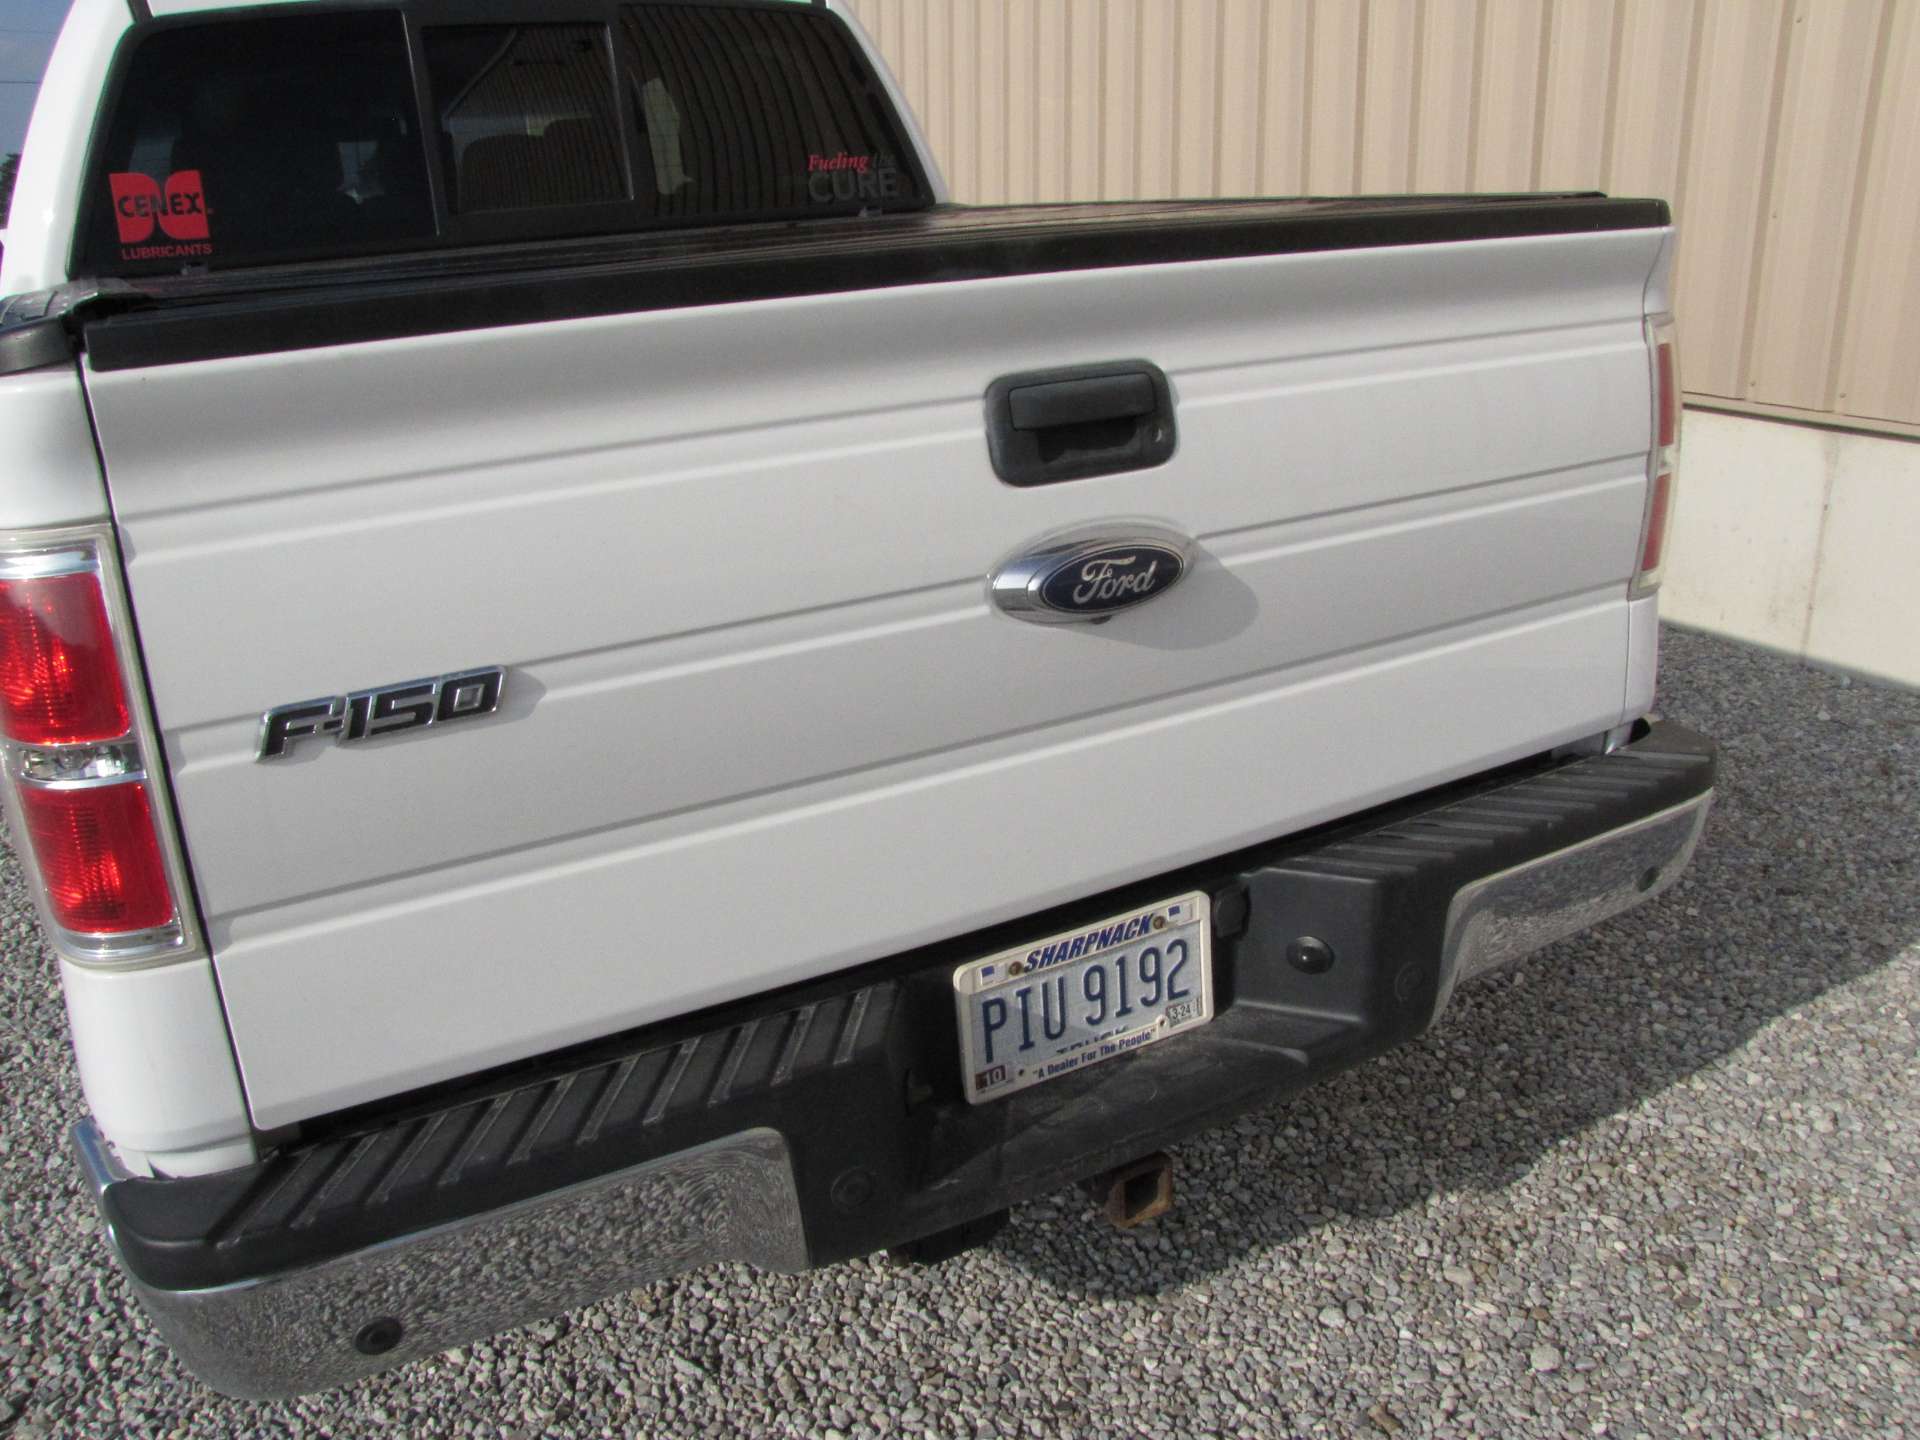 2014 Ford F-150 XLT pickup truck - Image 29 of 68